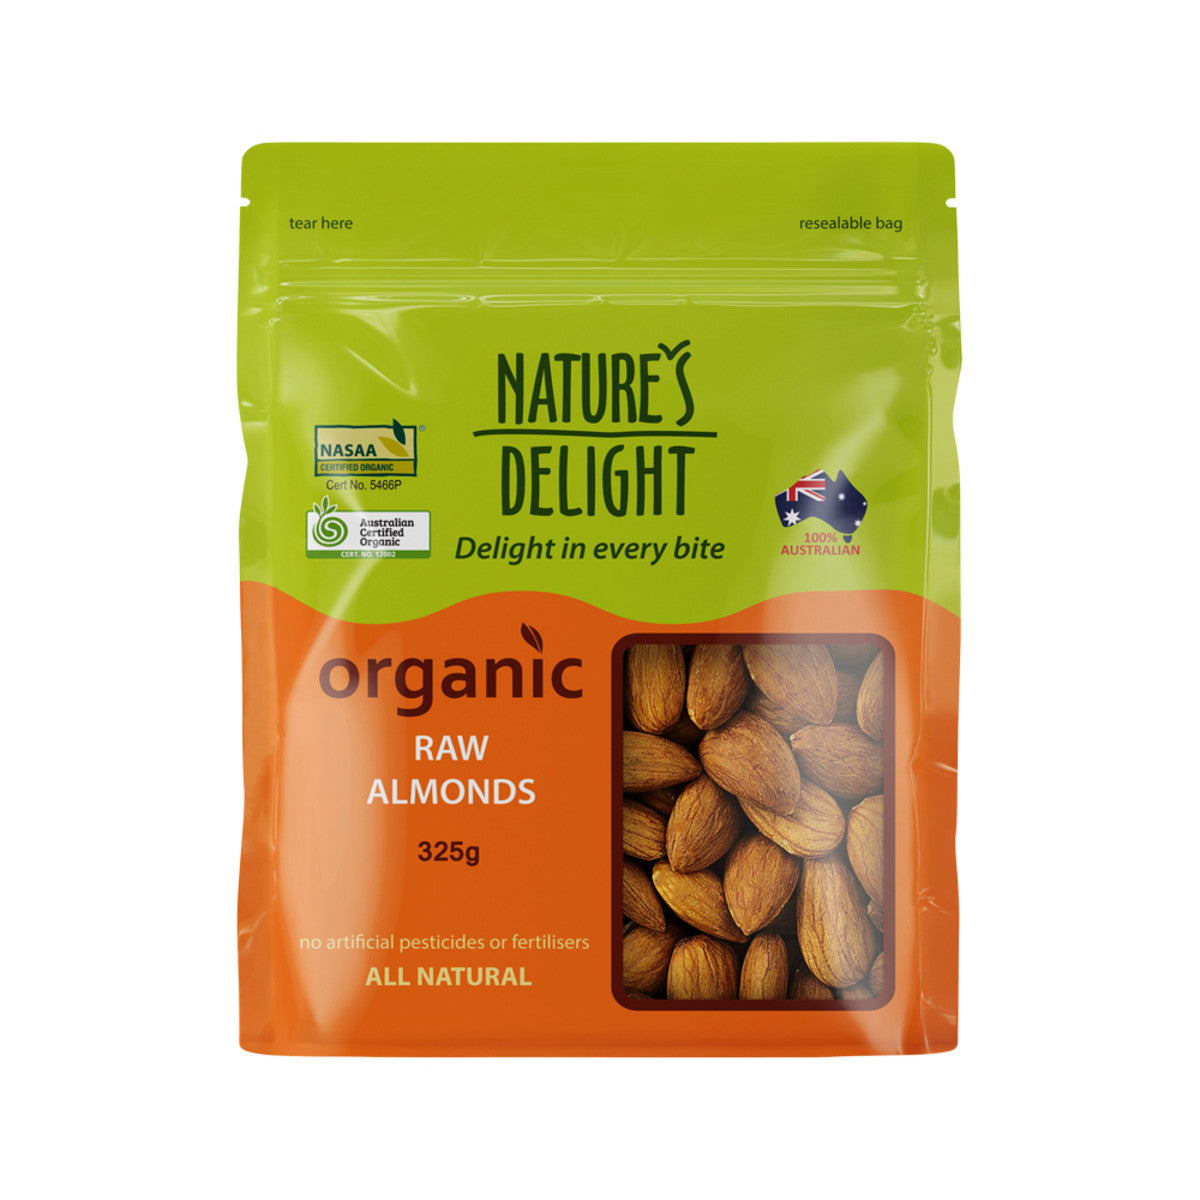 Natures Delight Organic Raw Almonds 325g